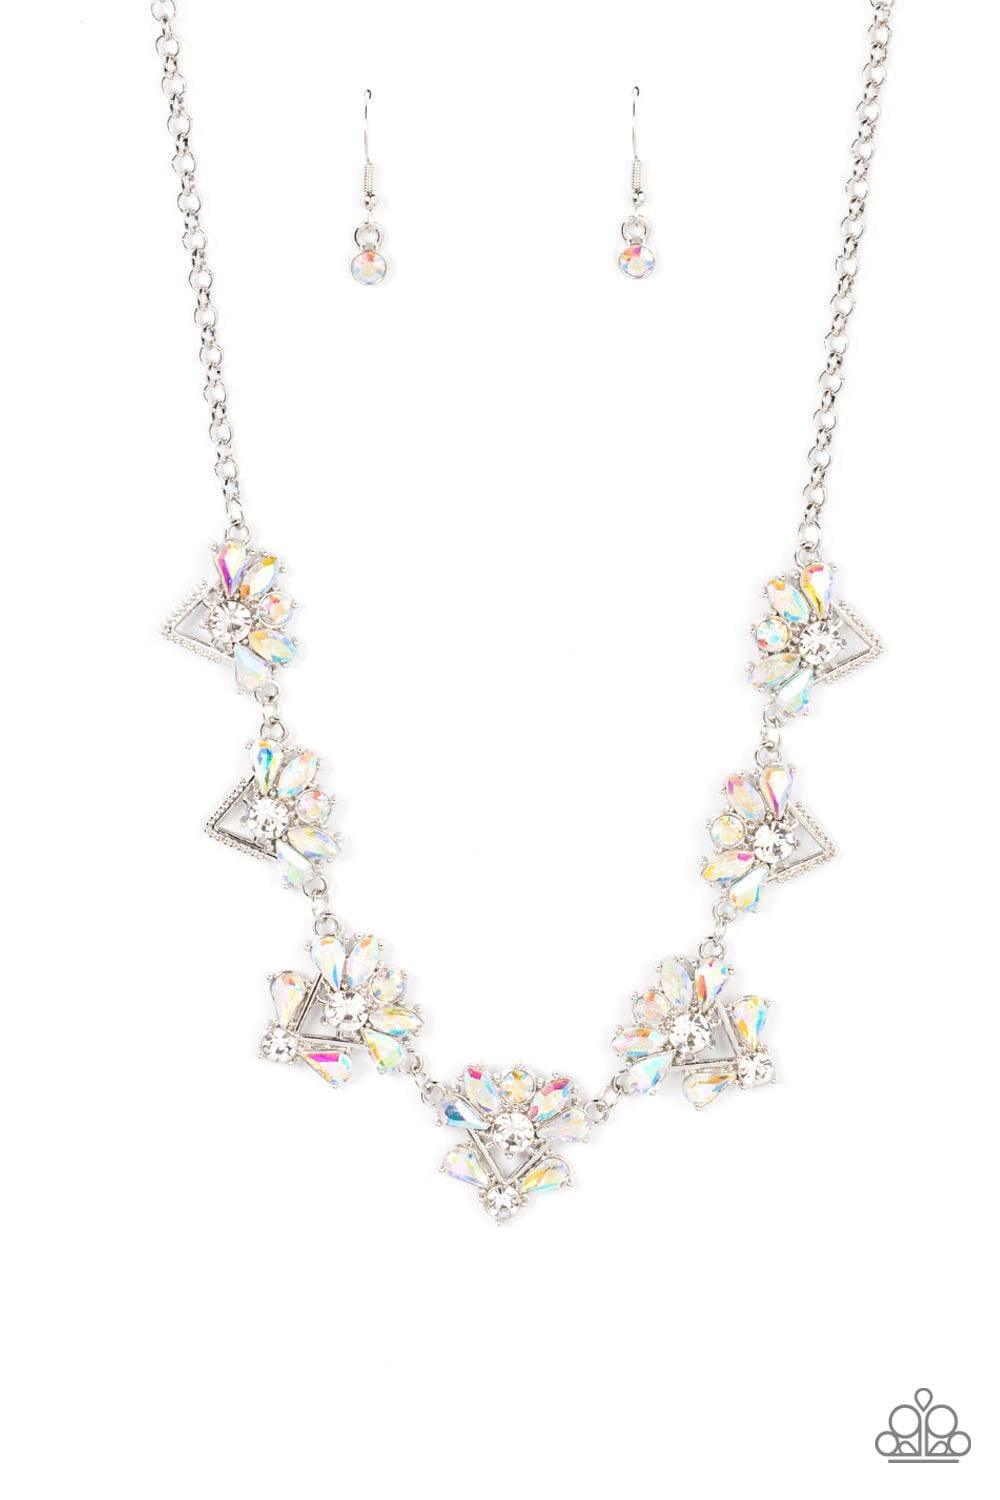 Paparazzi Accessories - Extragalactic Extravagance - Multicolor Necklace - Bling by JessieK